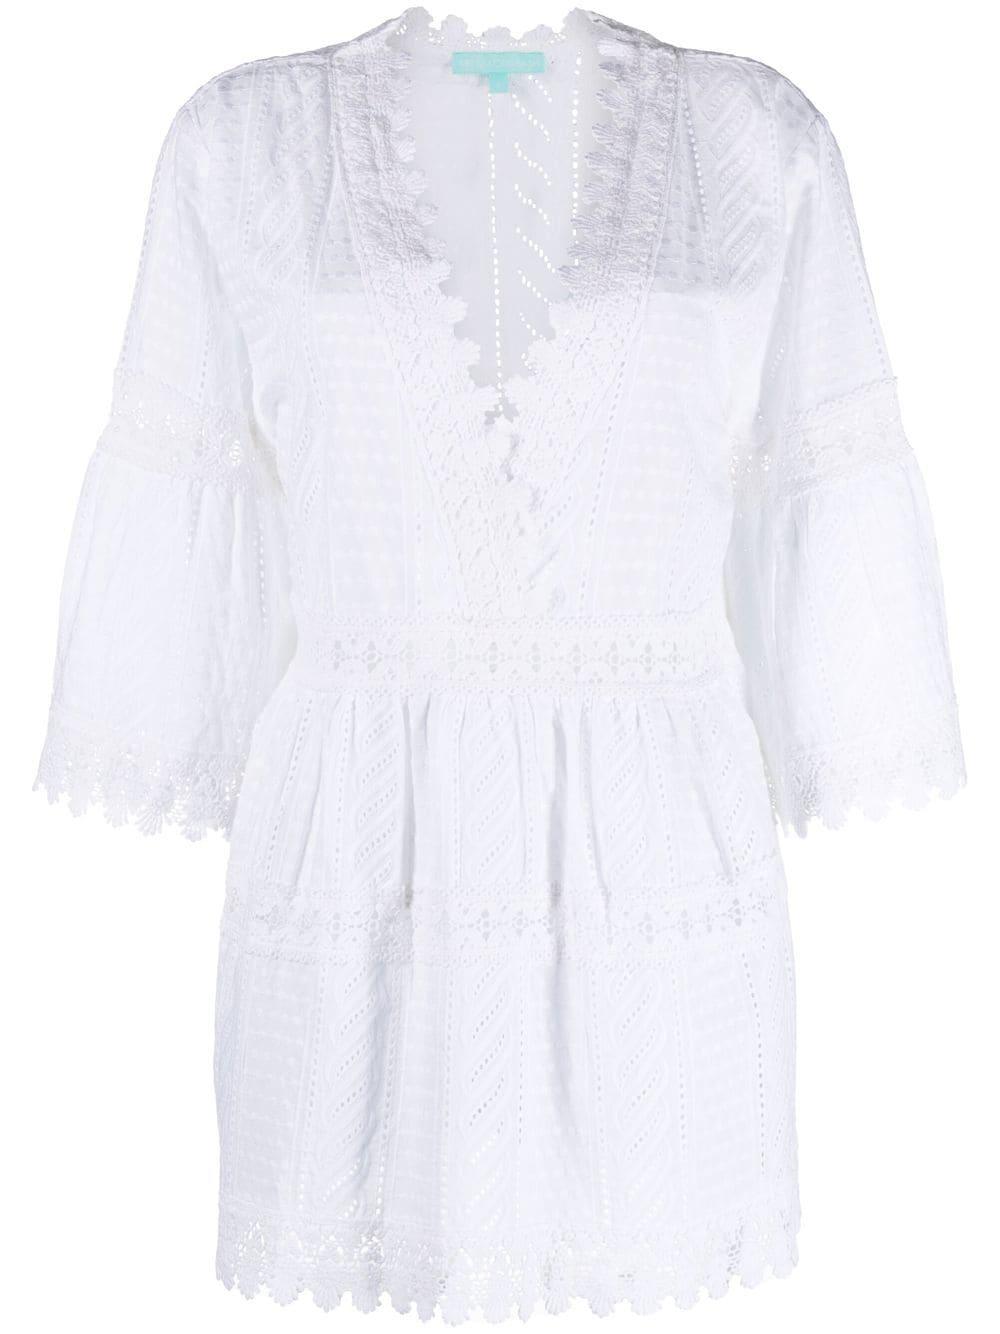 Melissa Odabash Victoria Broderie-anglaise Dress in White | Lyst